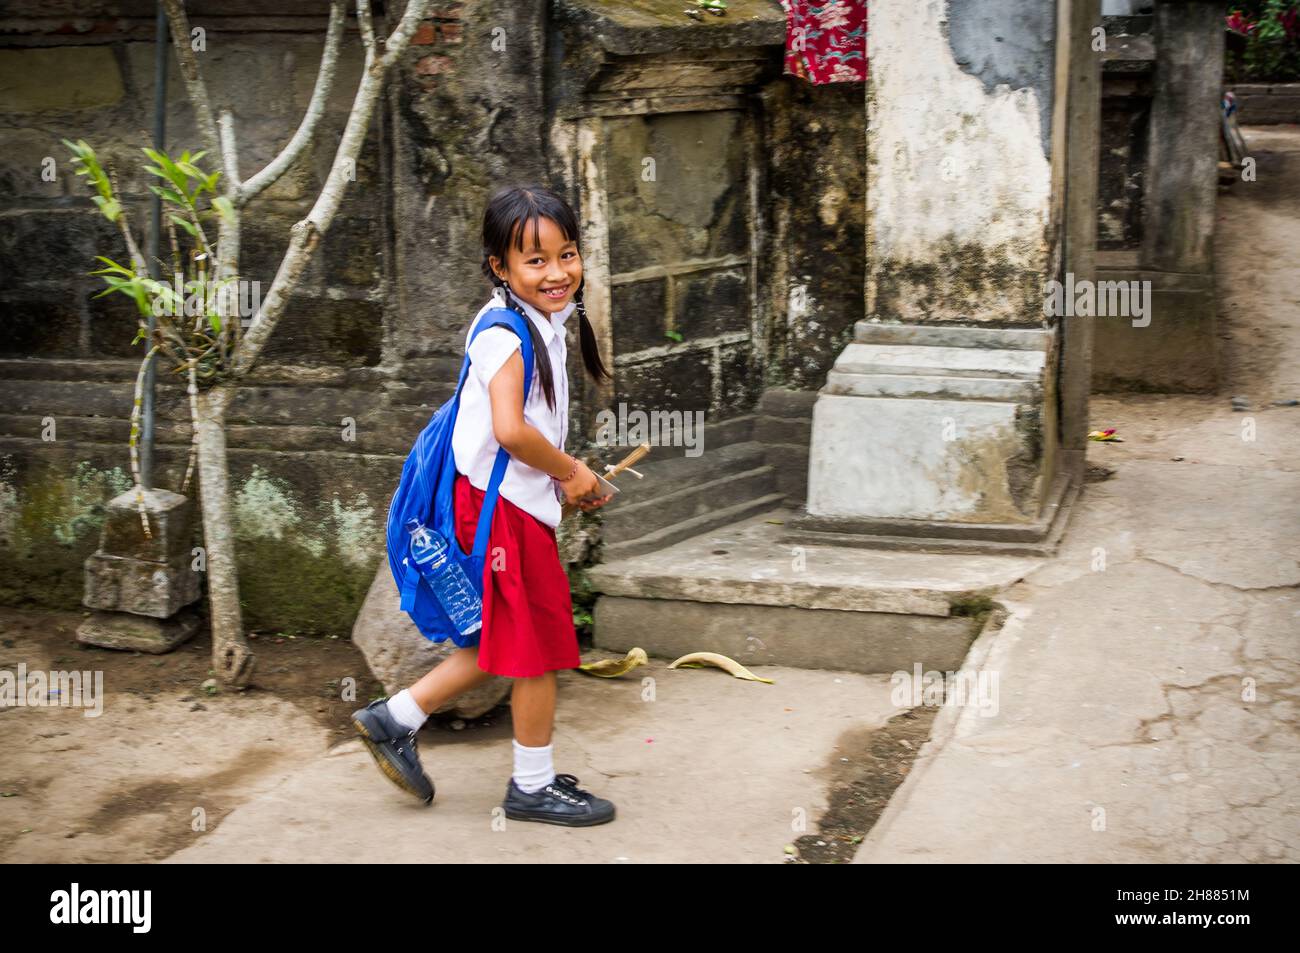 An Indonesian student is coming home from school. She is smiling and wearing a red skirt and a white shirt. Stock Photo